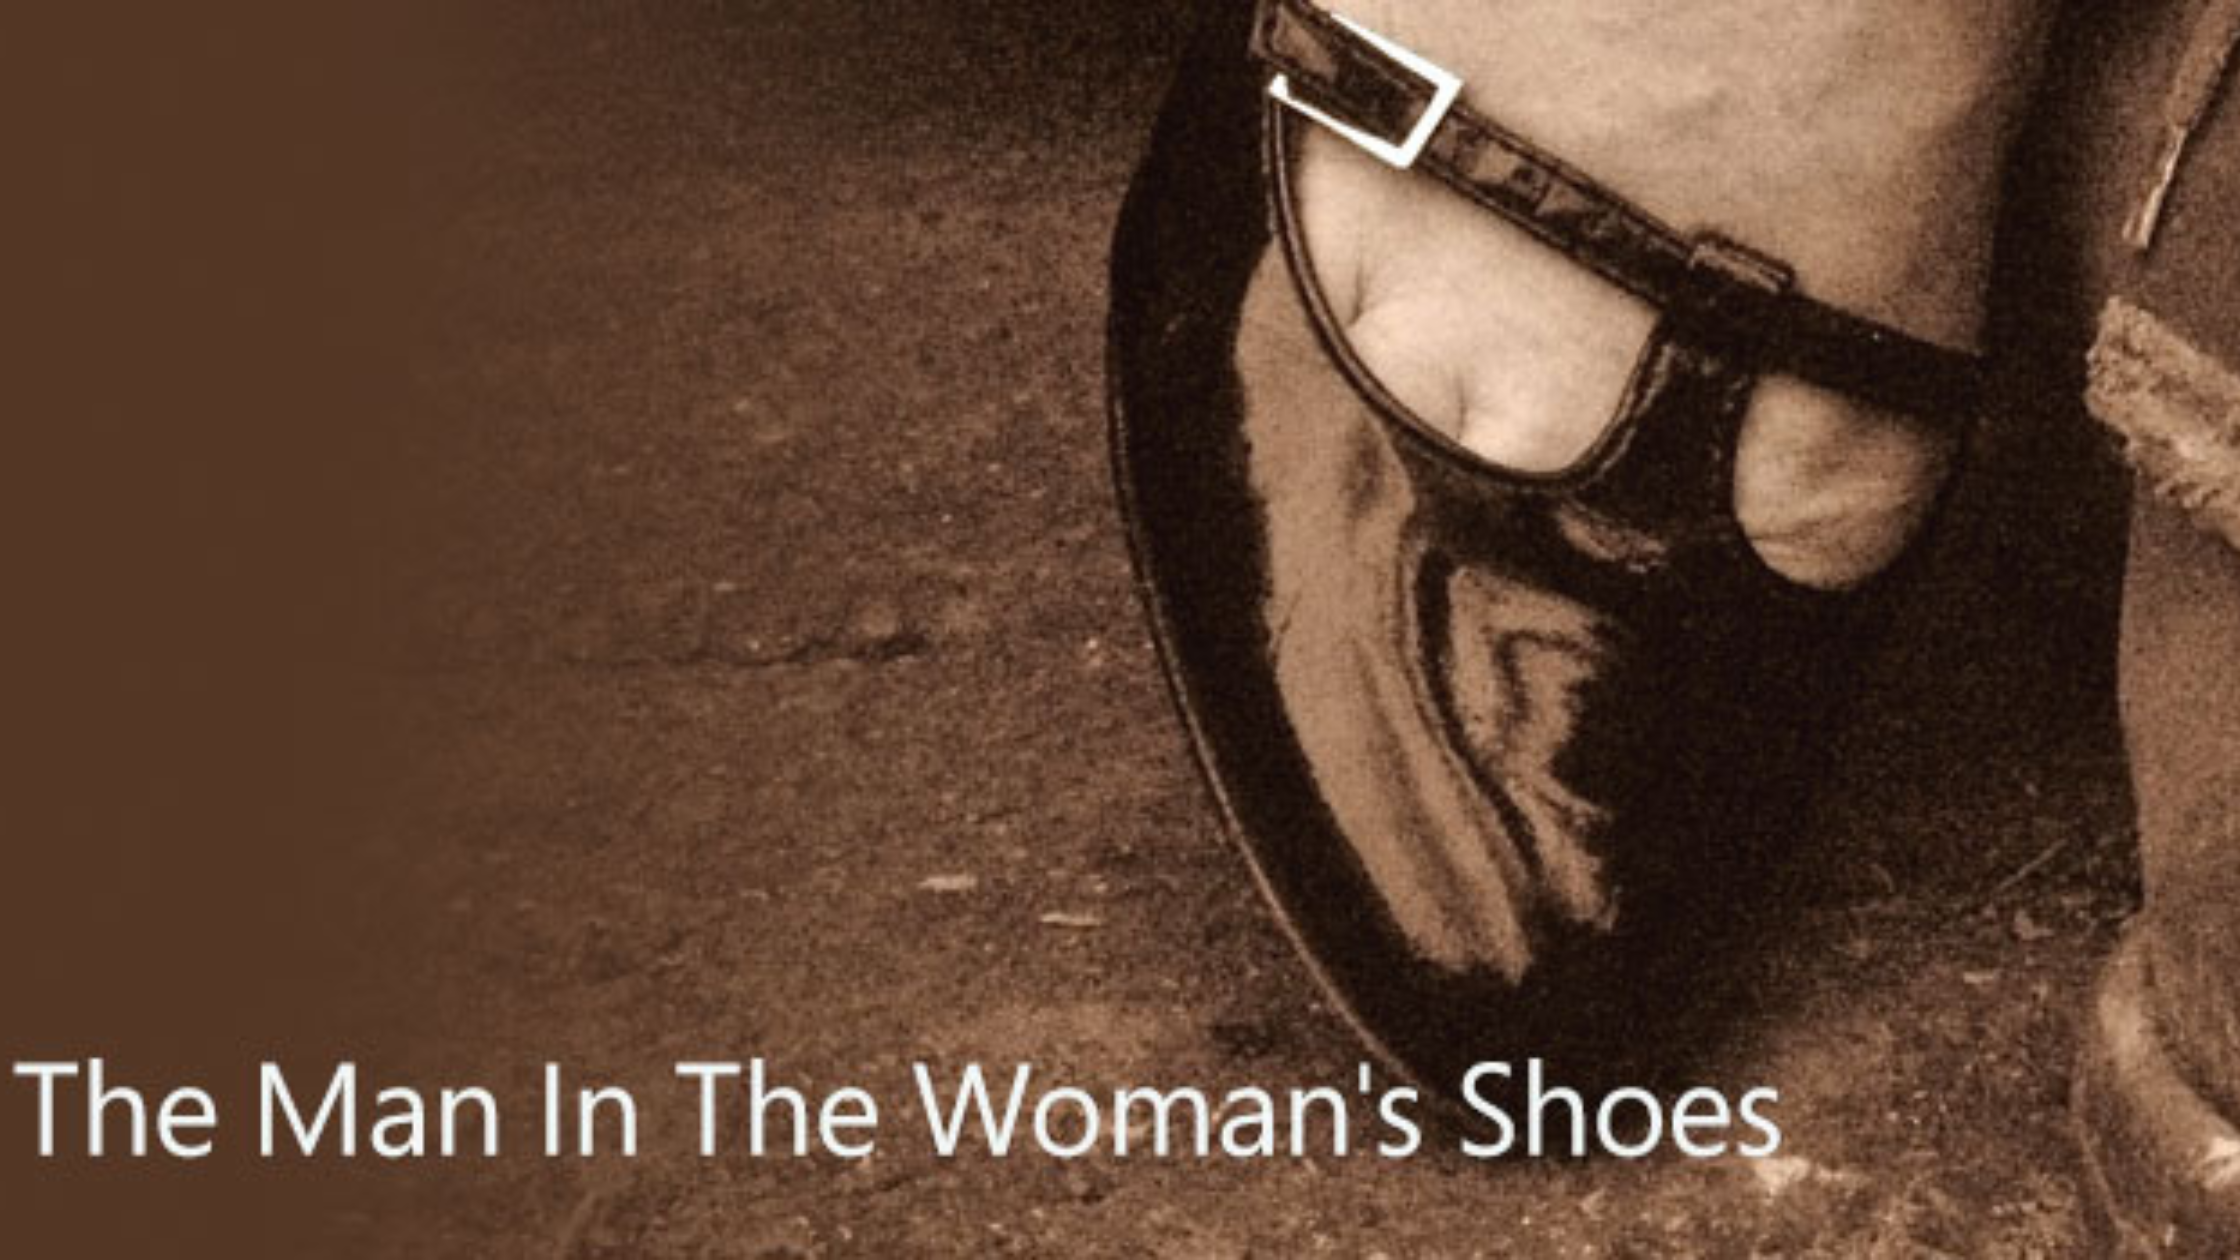 The Man In The Woman’s Shoes